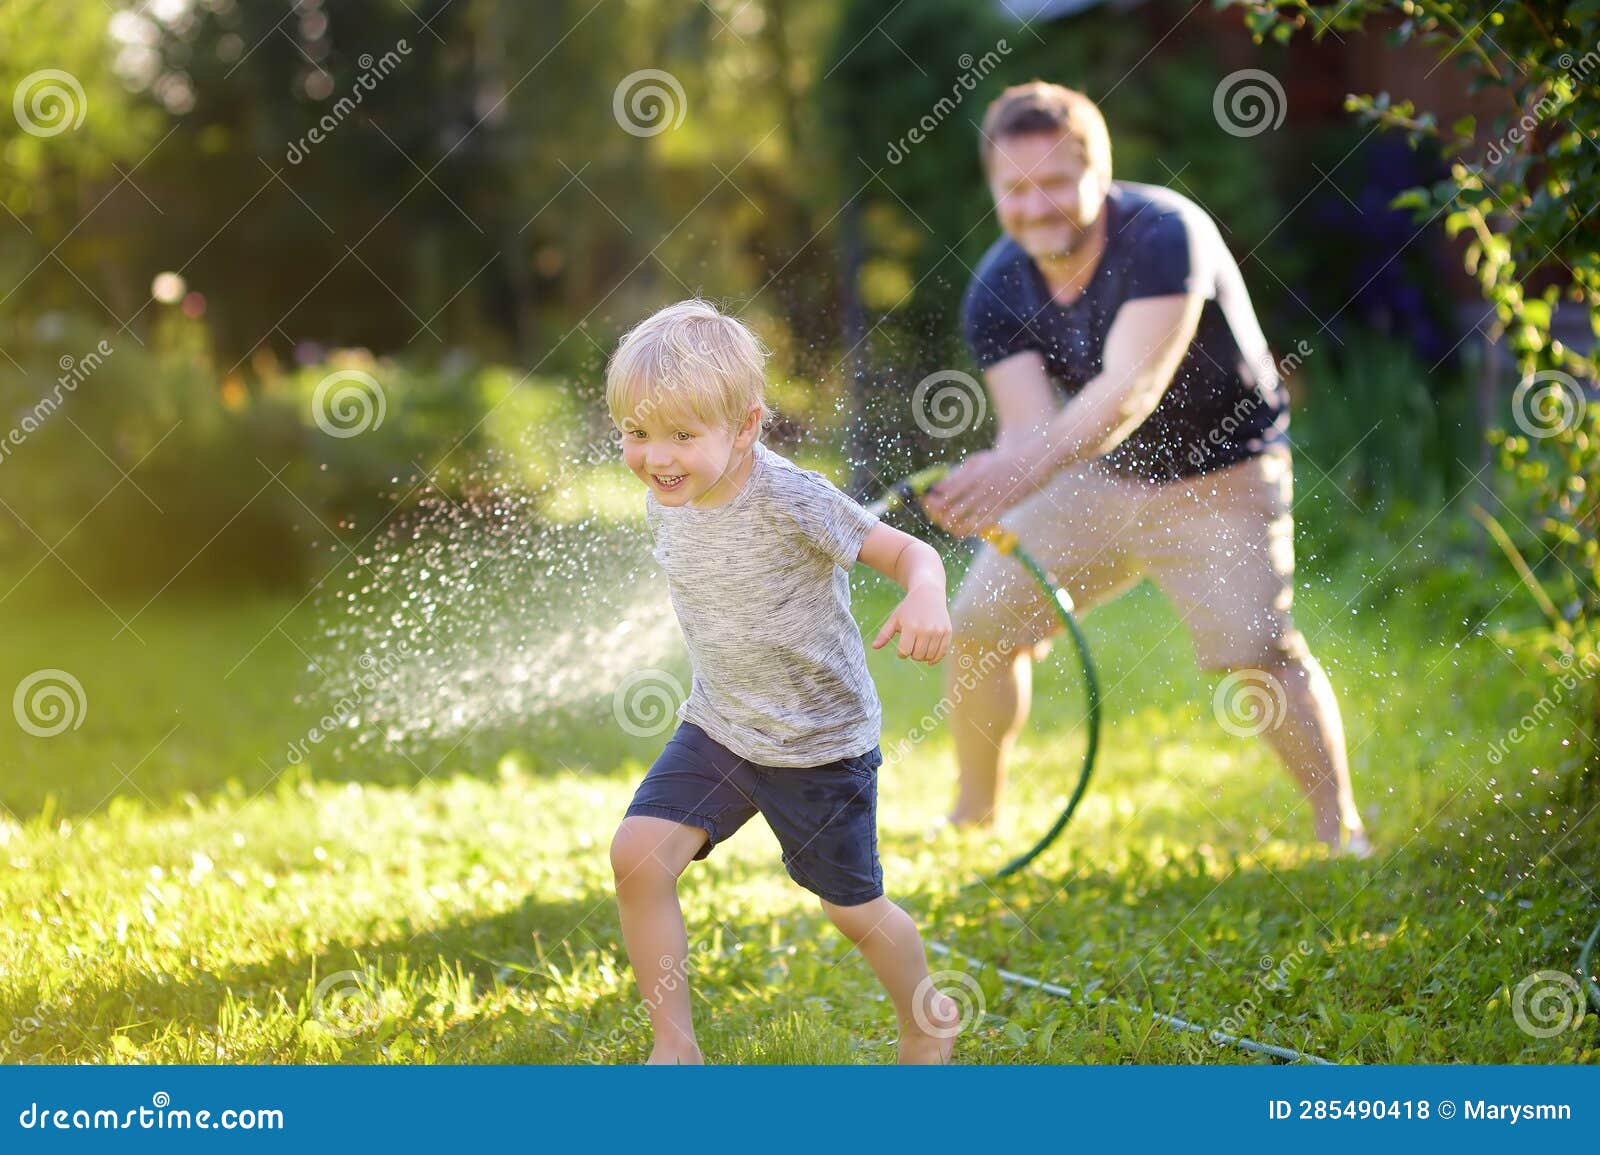 funny little boy with his father playing with garden hose in sunny backyard. preschooler child having fun with spray of water